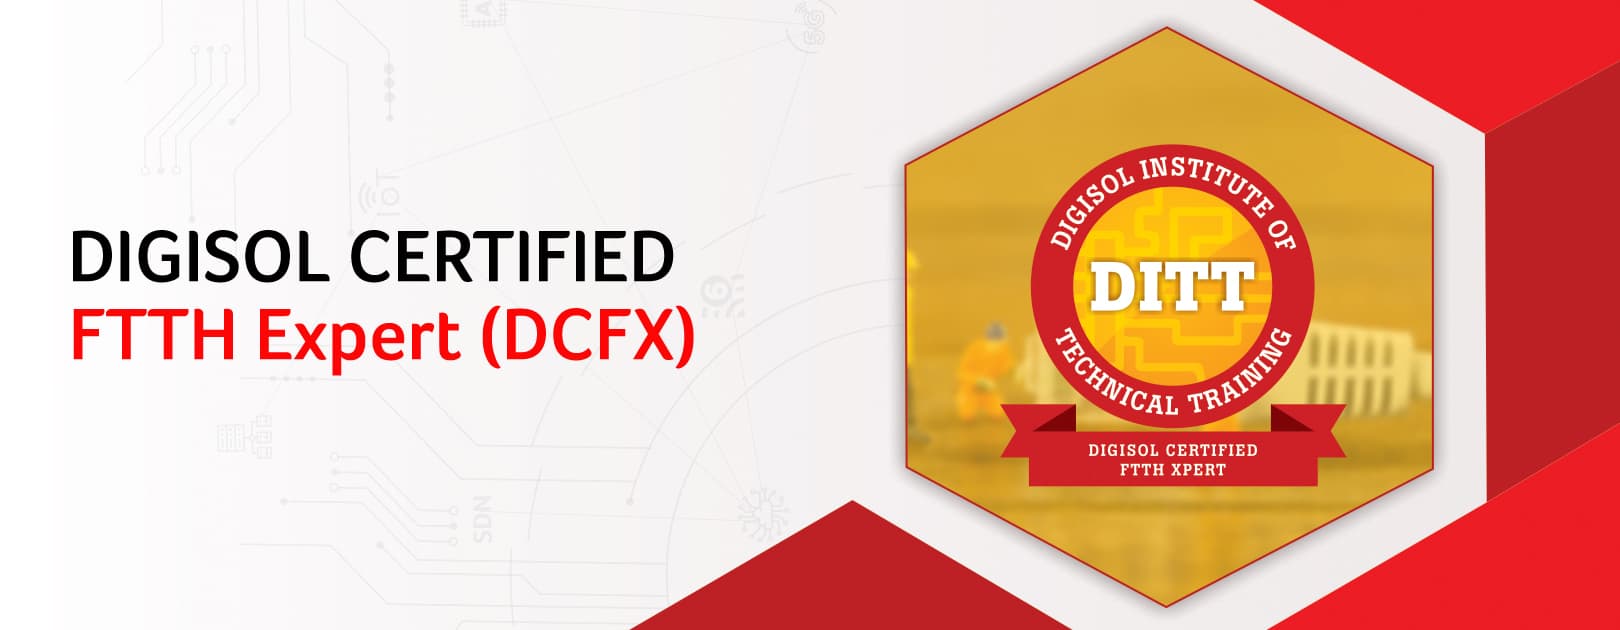 Digisol Certified FTTH Expert (DCFX) is an extensive program under DIGISOL Institute of Technical training (DITT) on FTTH ( Fiber to the Home) Solutions. The program will consist of complete understanding of fiber optics and FTTH technology with practical as well as hands on knowledge. The Program benefits are as listed below :  1. Understanding of fiber optics and FTTH basics. 2. GPON/GEPON technologies and next gen FTTX 3. FTTH BOQ preparation. 4. Provide training to configure DIGISOL FTTH products.  Certification Validity : One year